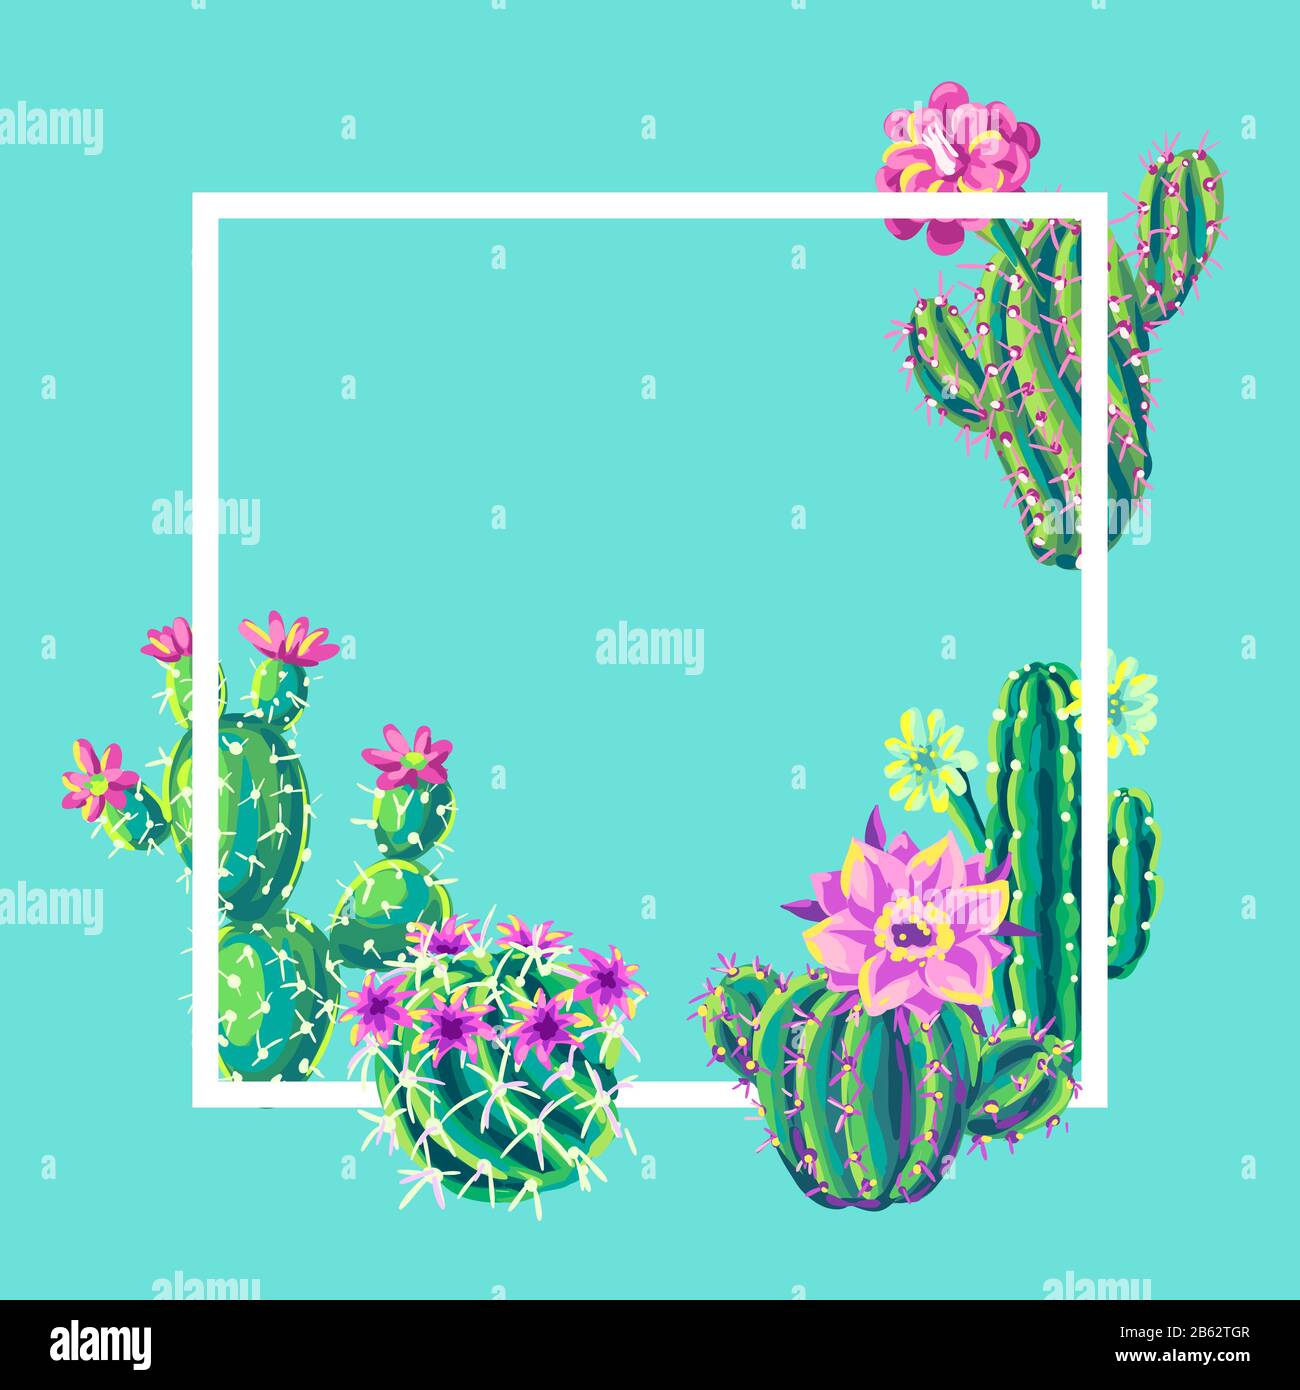 Background with cacti and flowers. Stock Vector